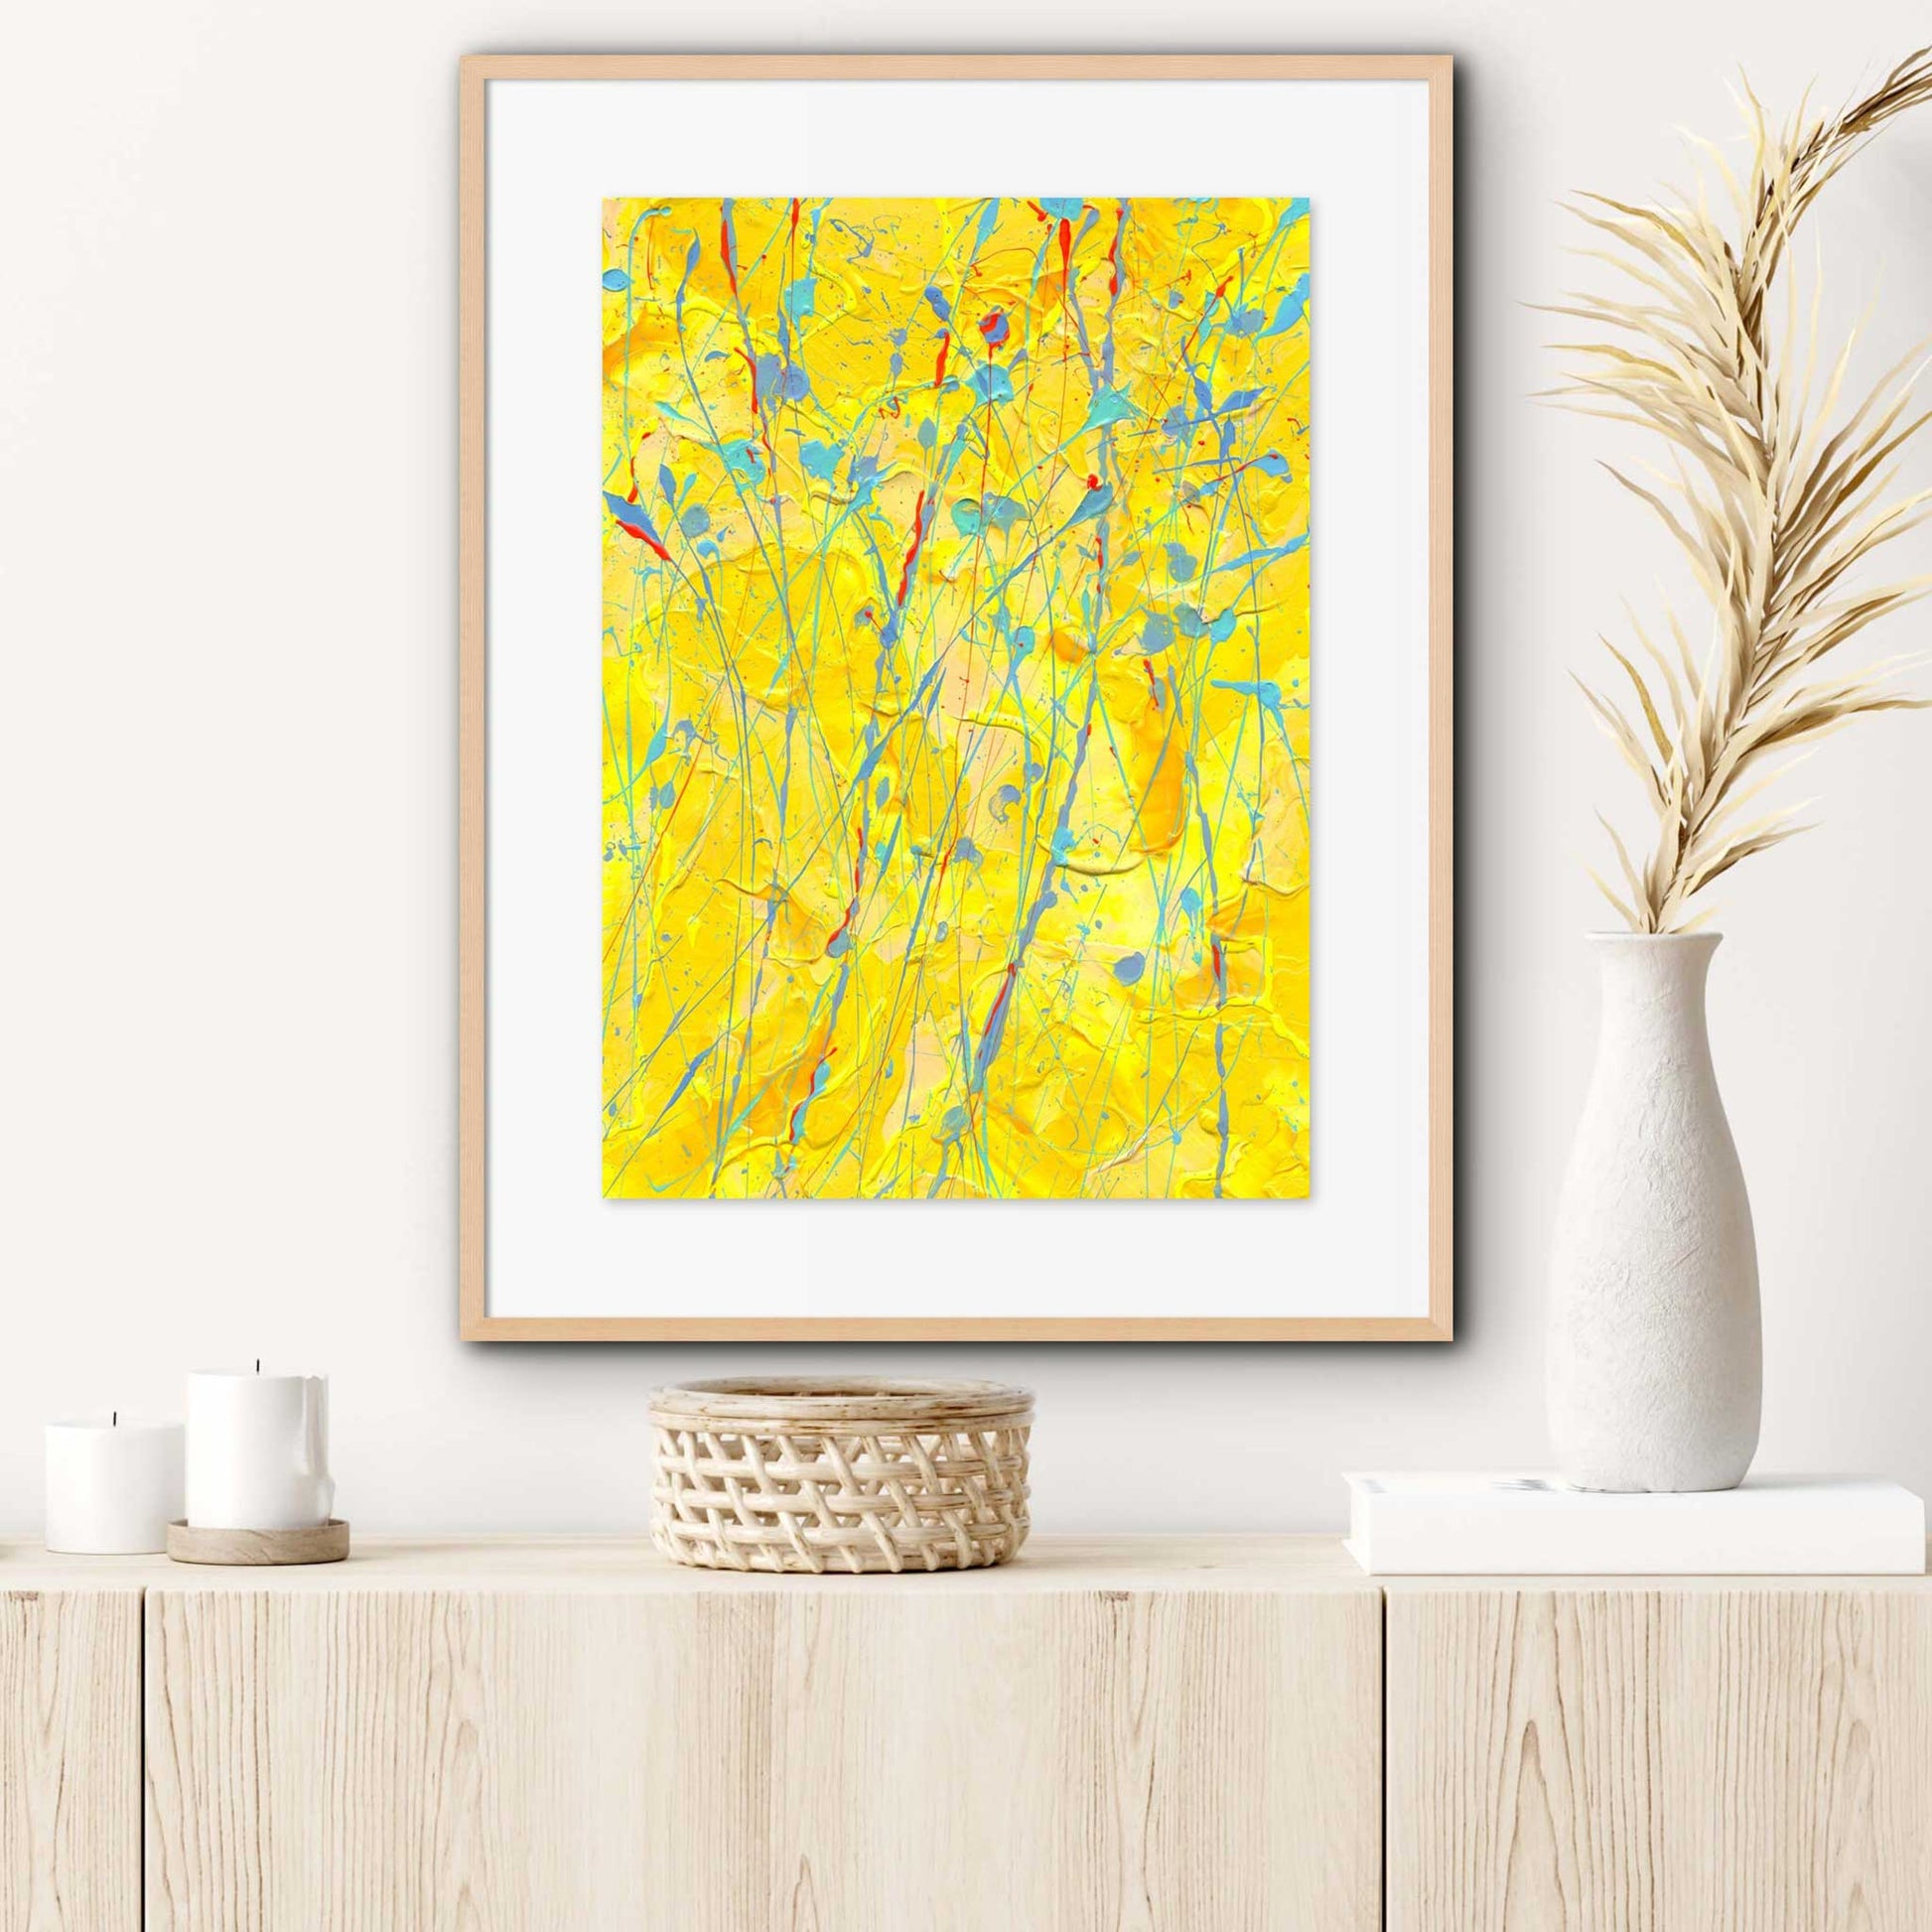 Sunflower is an original abstract painting on archival paper, by Brigdet Bradley, Seen here framed in oak hanging in situ with neutral decor. Find out more.